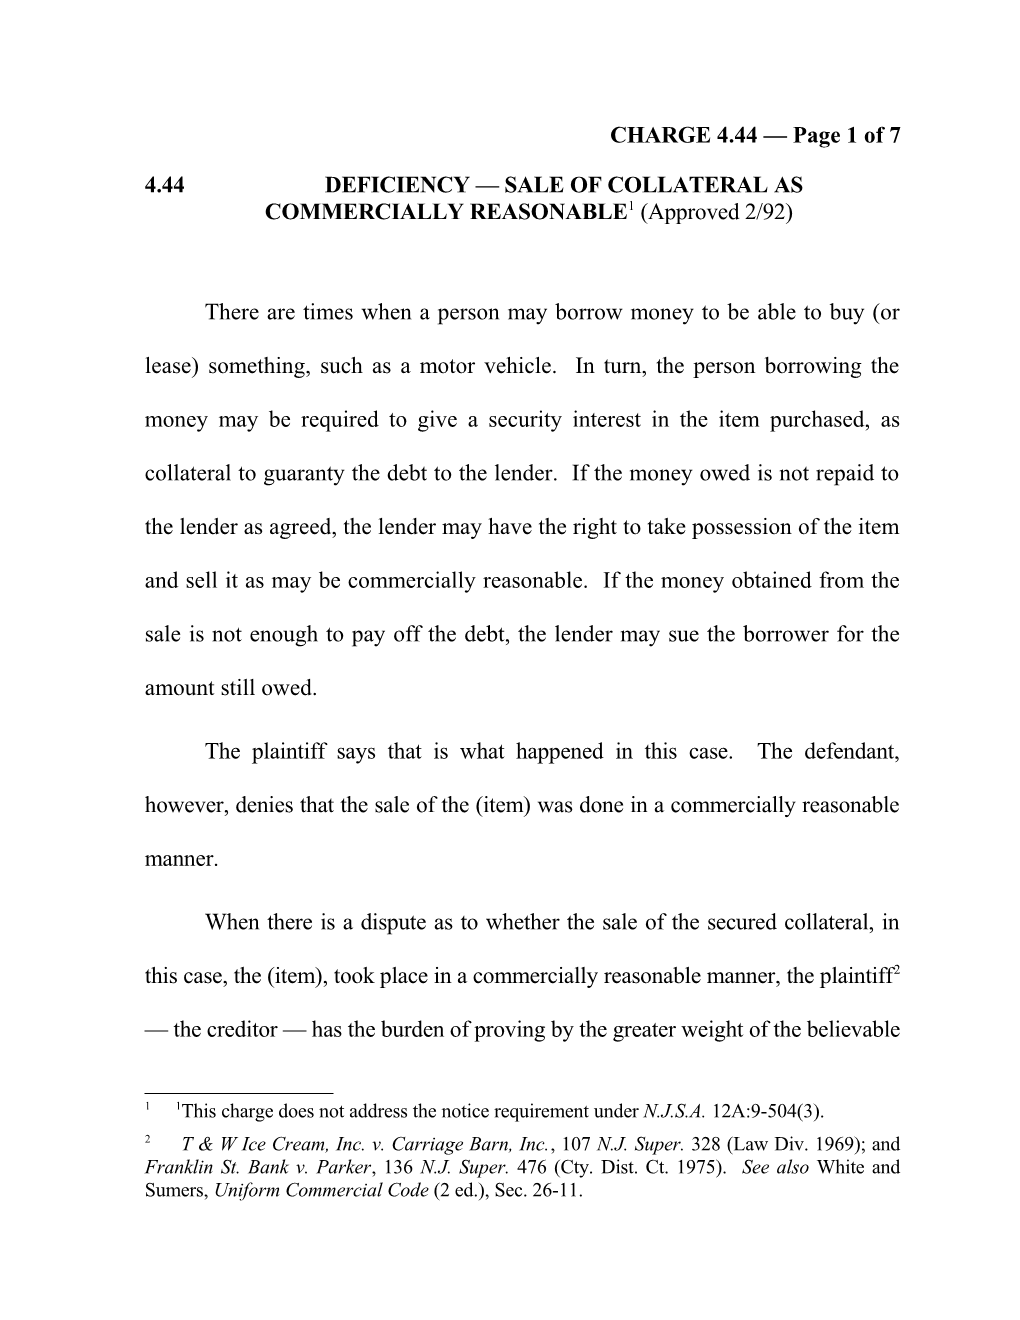 4.44DEFICIENCY SALE of COLLATERAL AS COMMERCIALLY REASONABLE 1 (Approved 2/92)